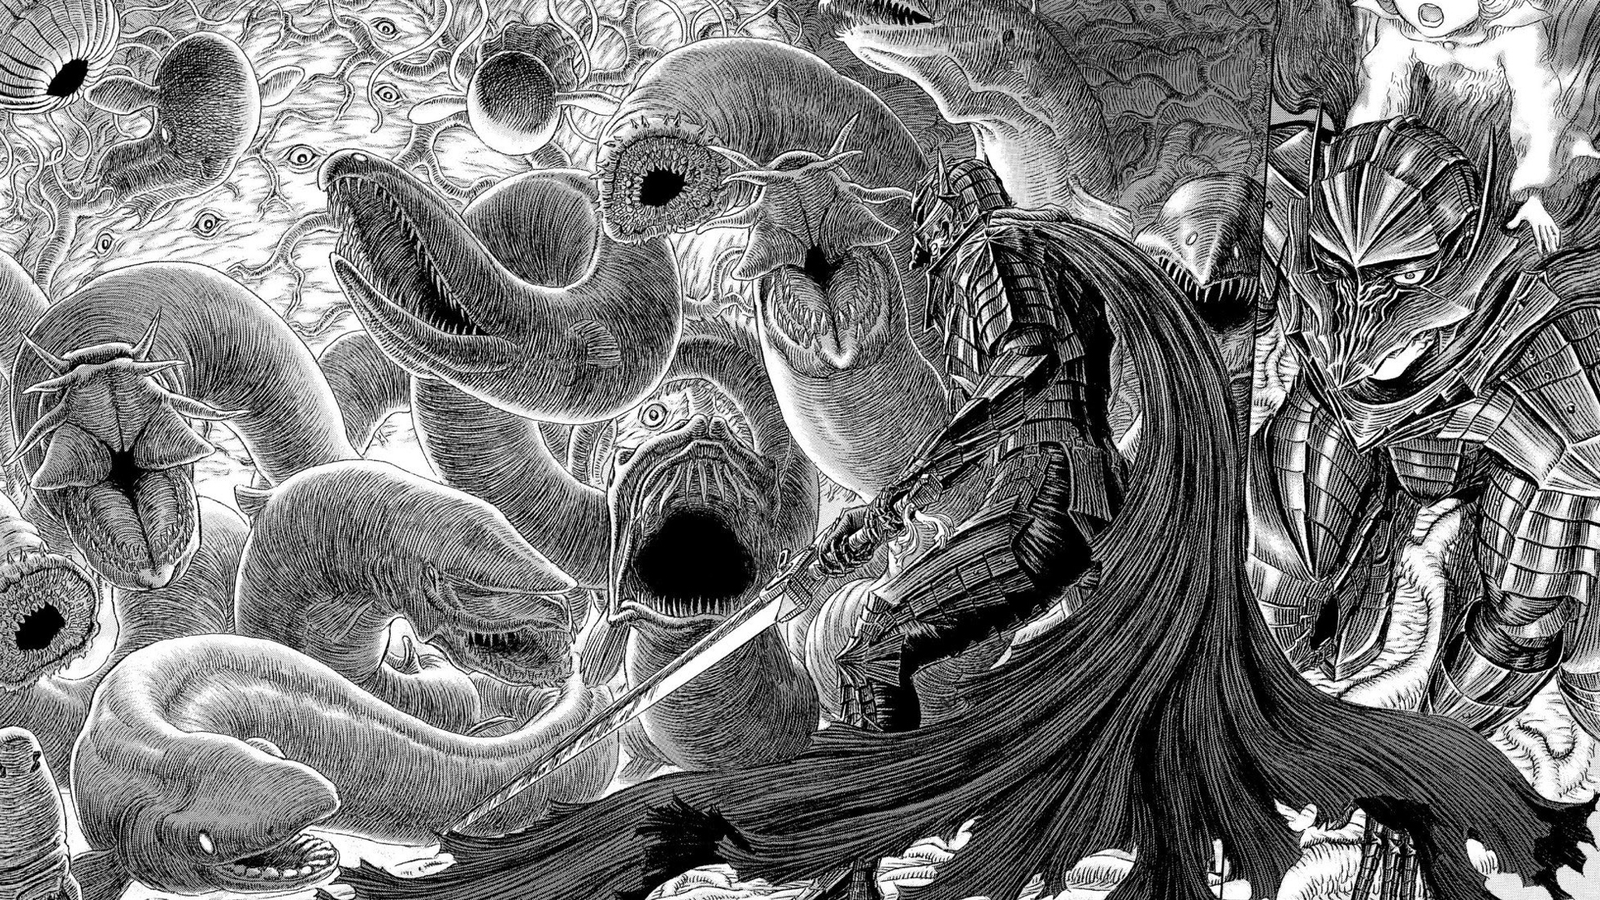 Modern tabletop gaming owes a huge debt to Kentaro Miura and